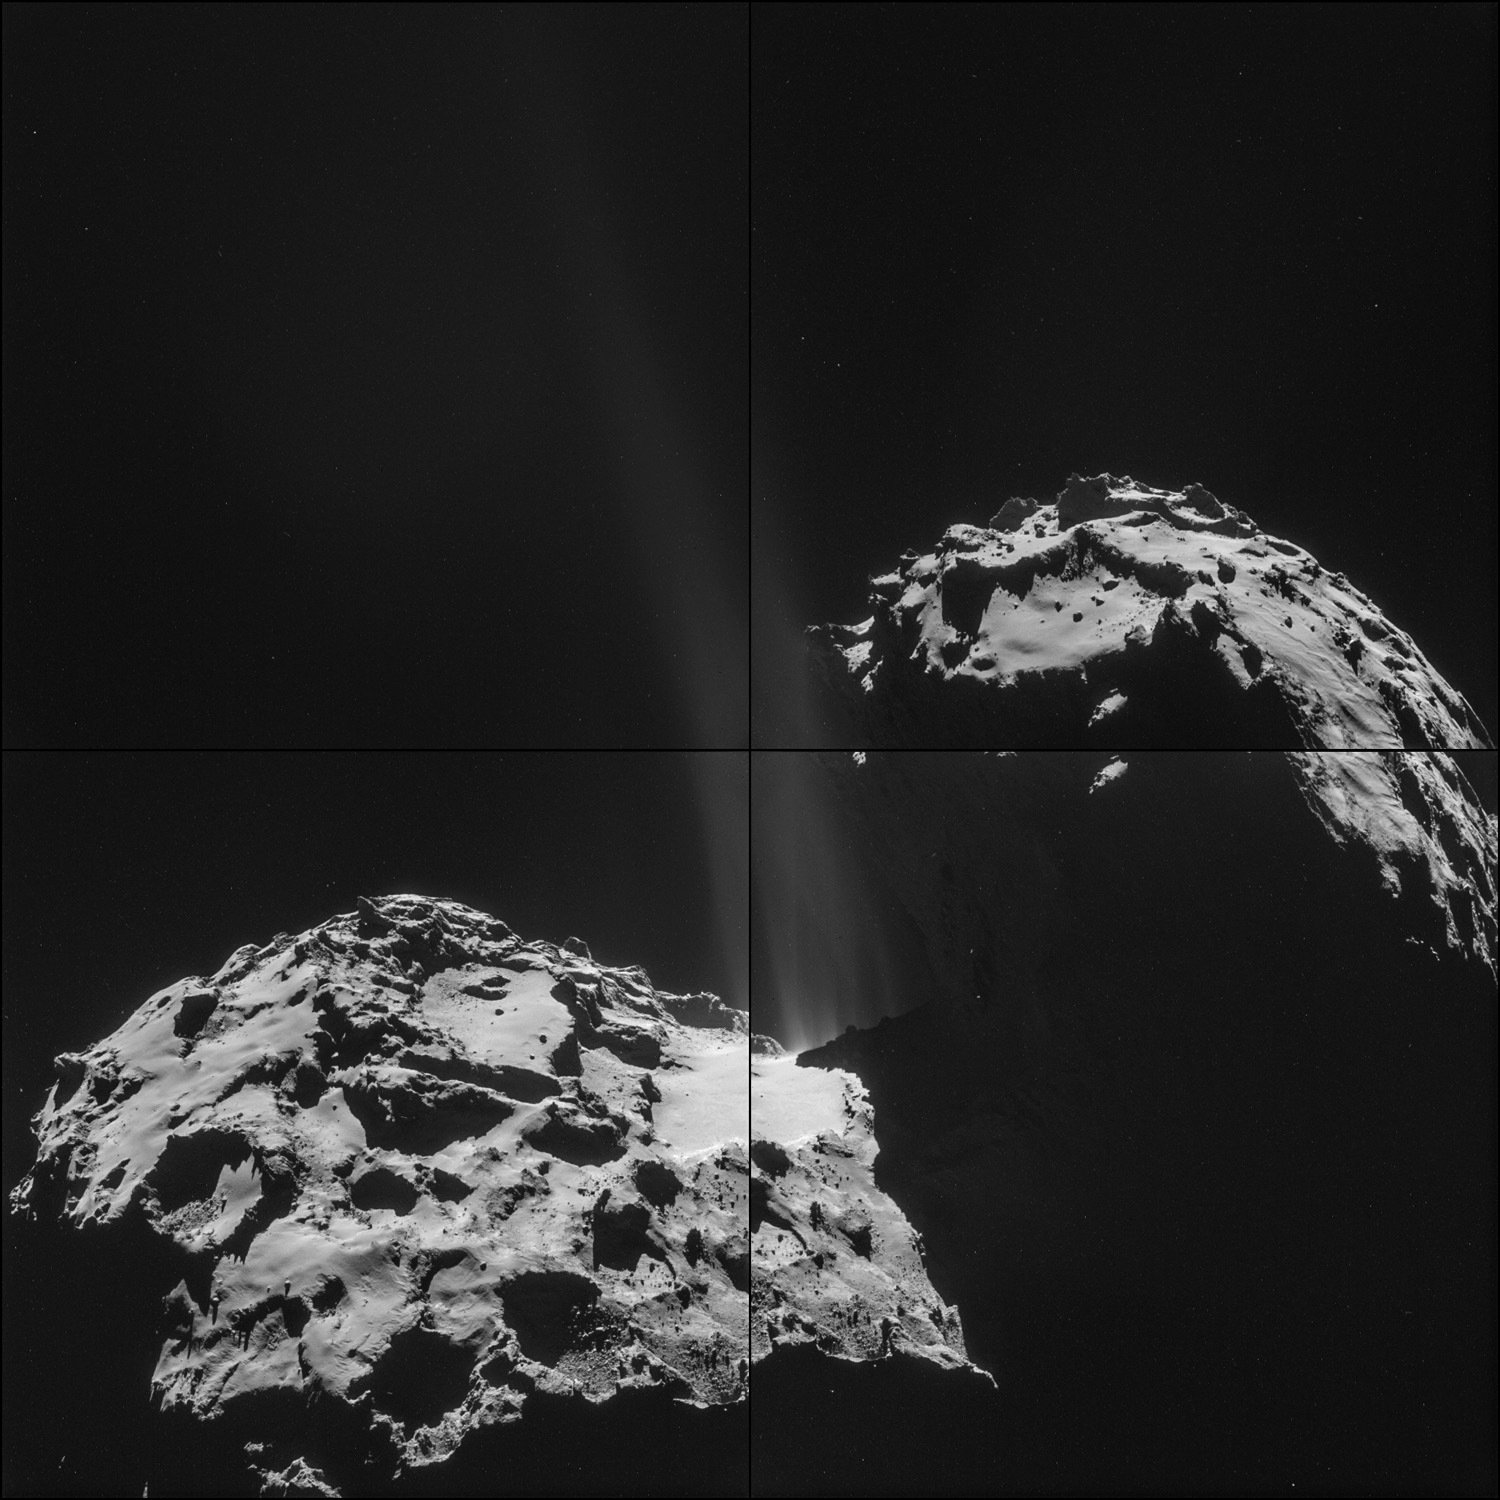 Four image montage of comet 67P/Churyumov-Gerasimenko taken by Rosetta on 26 September 2014 from a distance of 26.3 km  (16 mi)  from the center of the comet.   Credit: ESA/Rosetta/NAVCAM